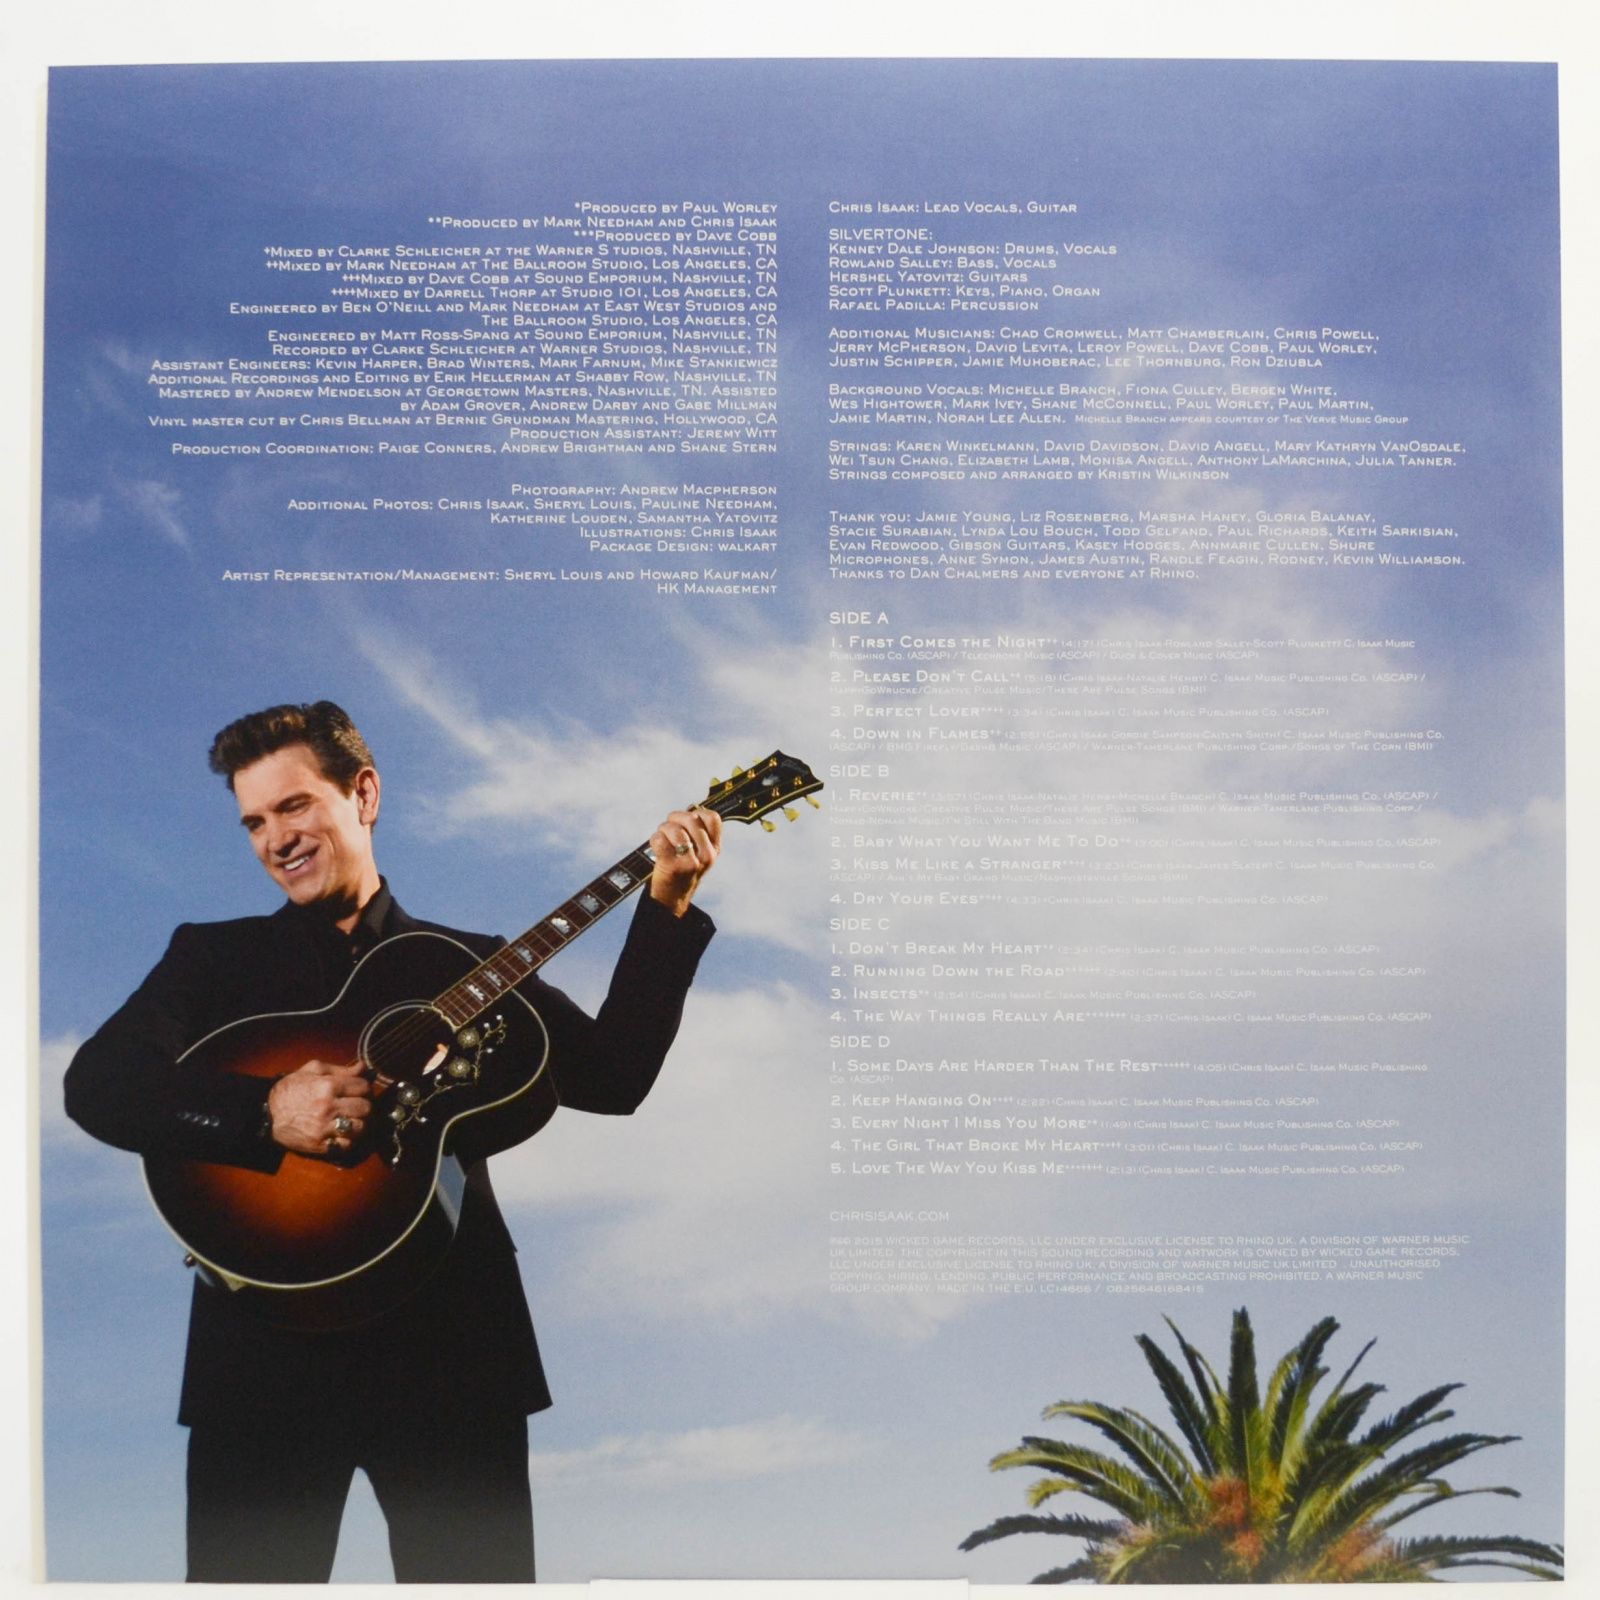 Chris Isaak — First Comes The Night (2LP), 2015